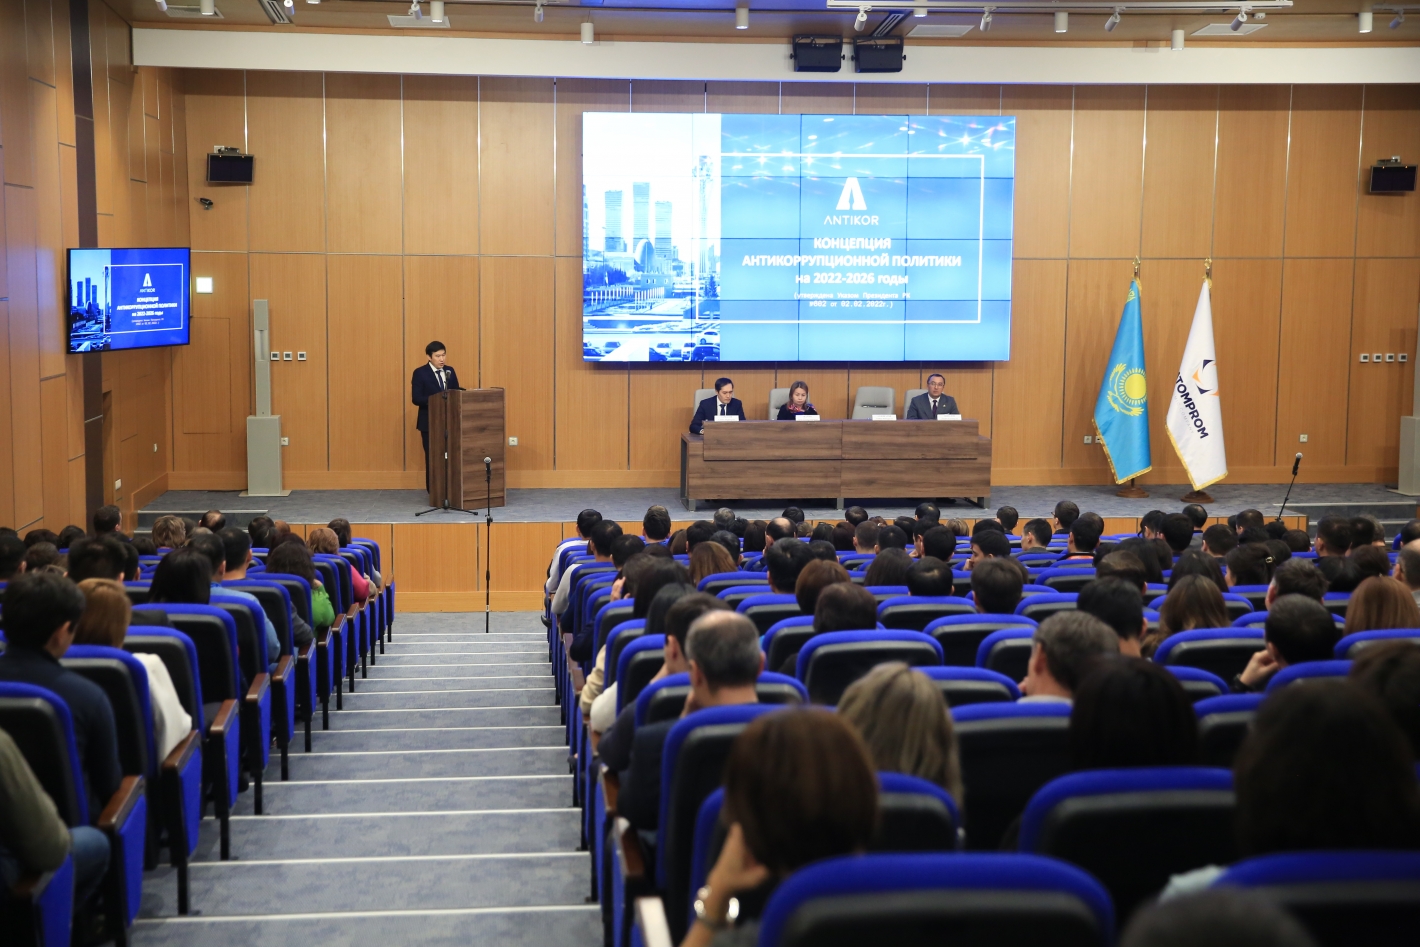 Anti-corruption Agency and Kazatomprom discussed anti-corruption issues